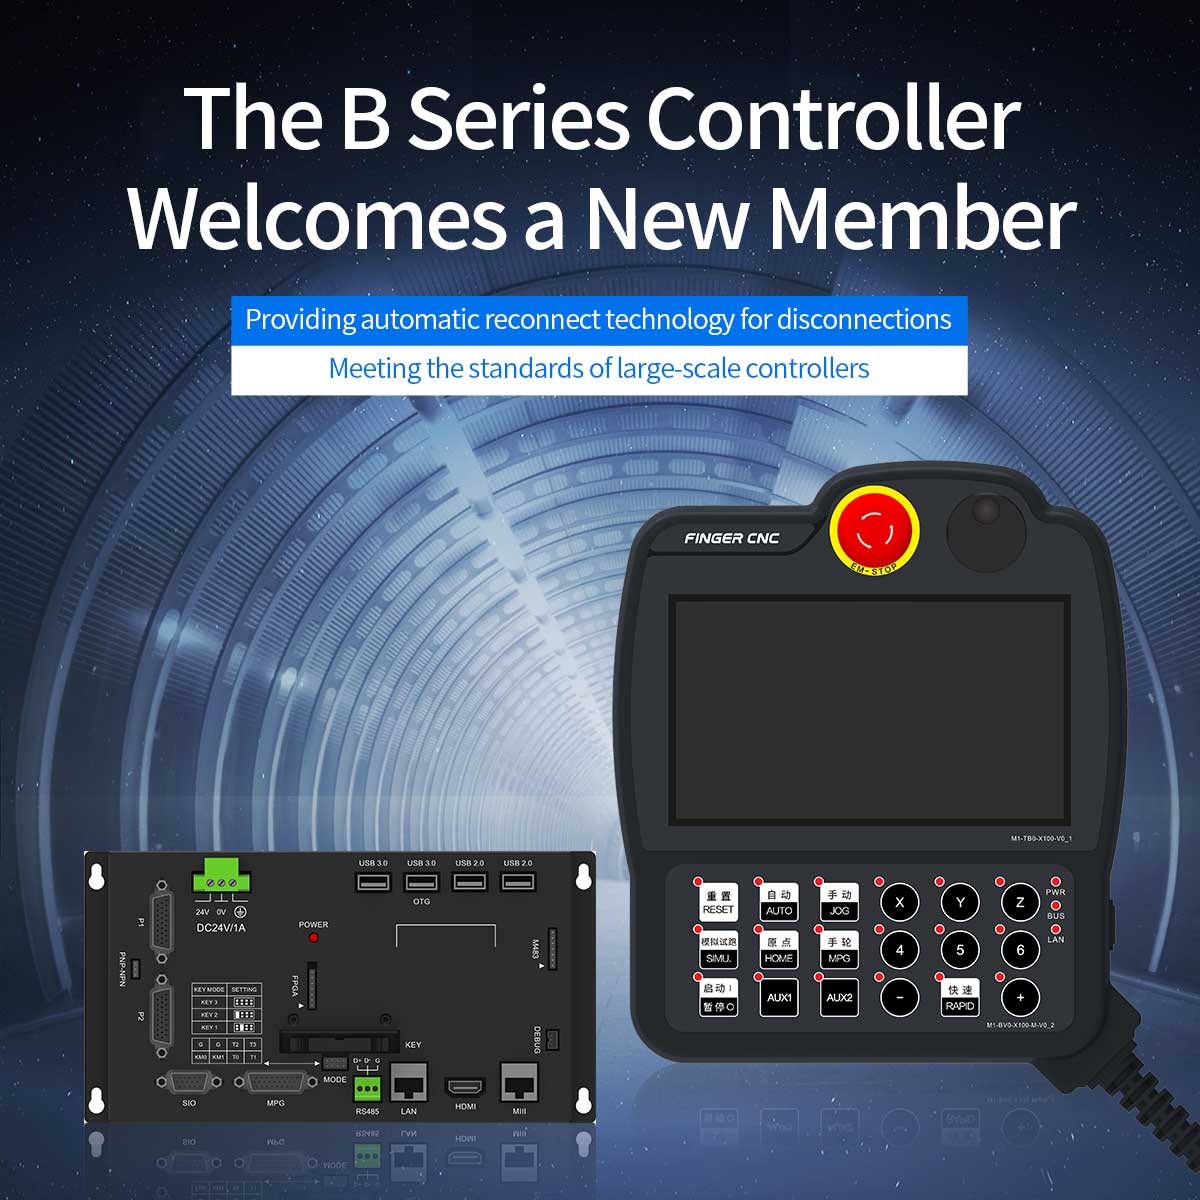  The B Series Control Welcomes New Members